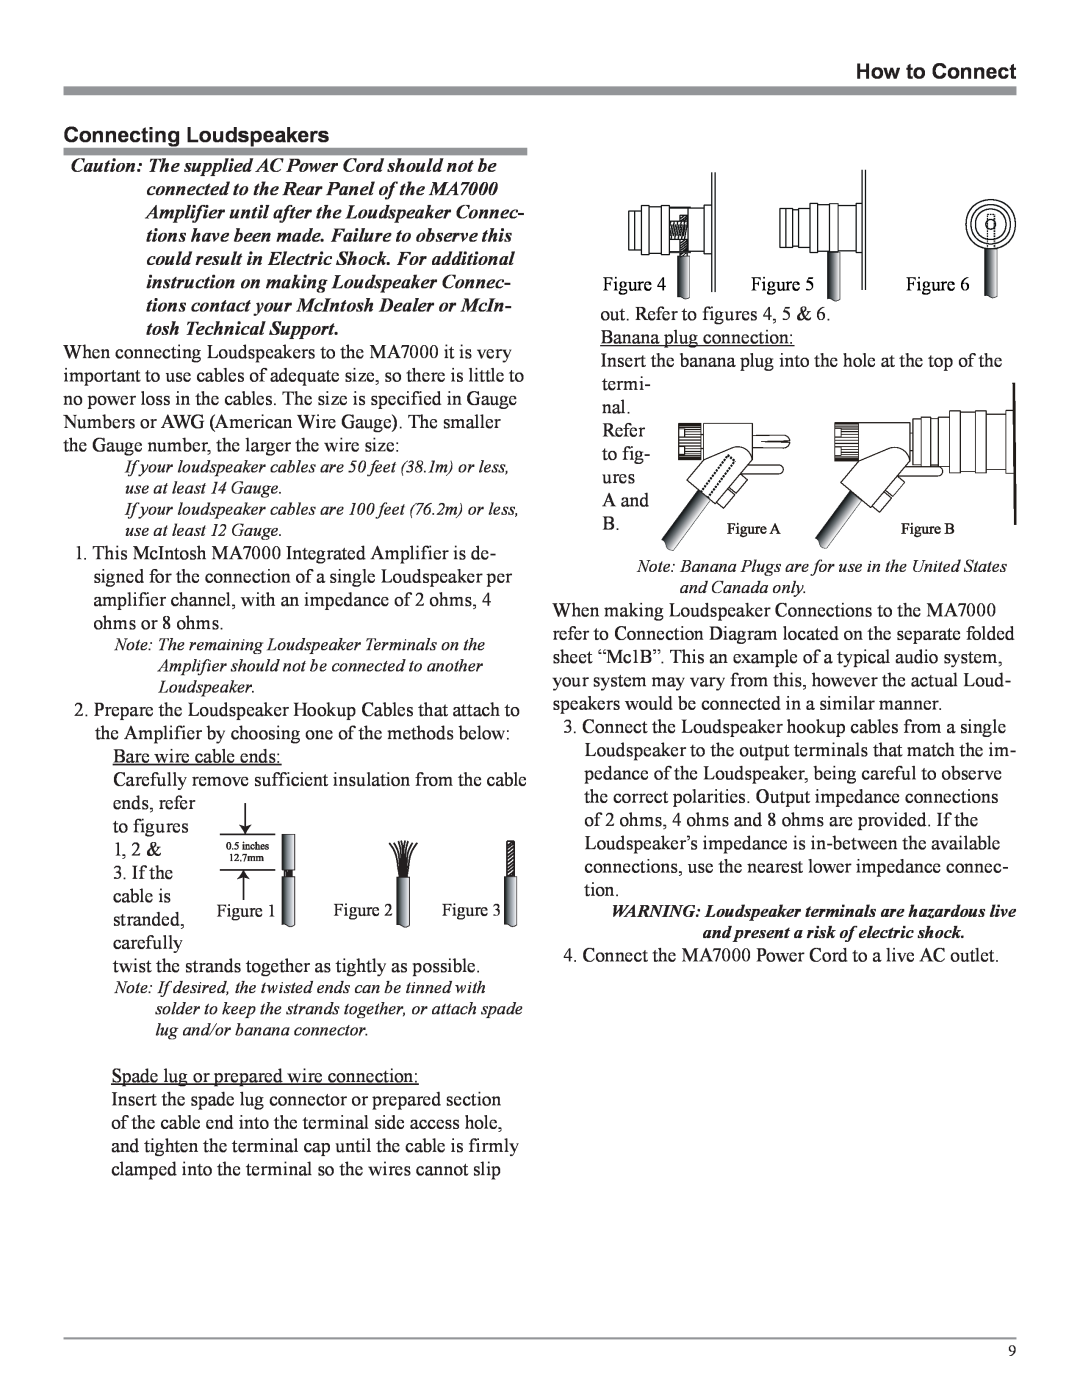 McIntosh MA7000 owner manual How to Connect, Connecting Loudspeakers 